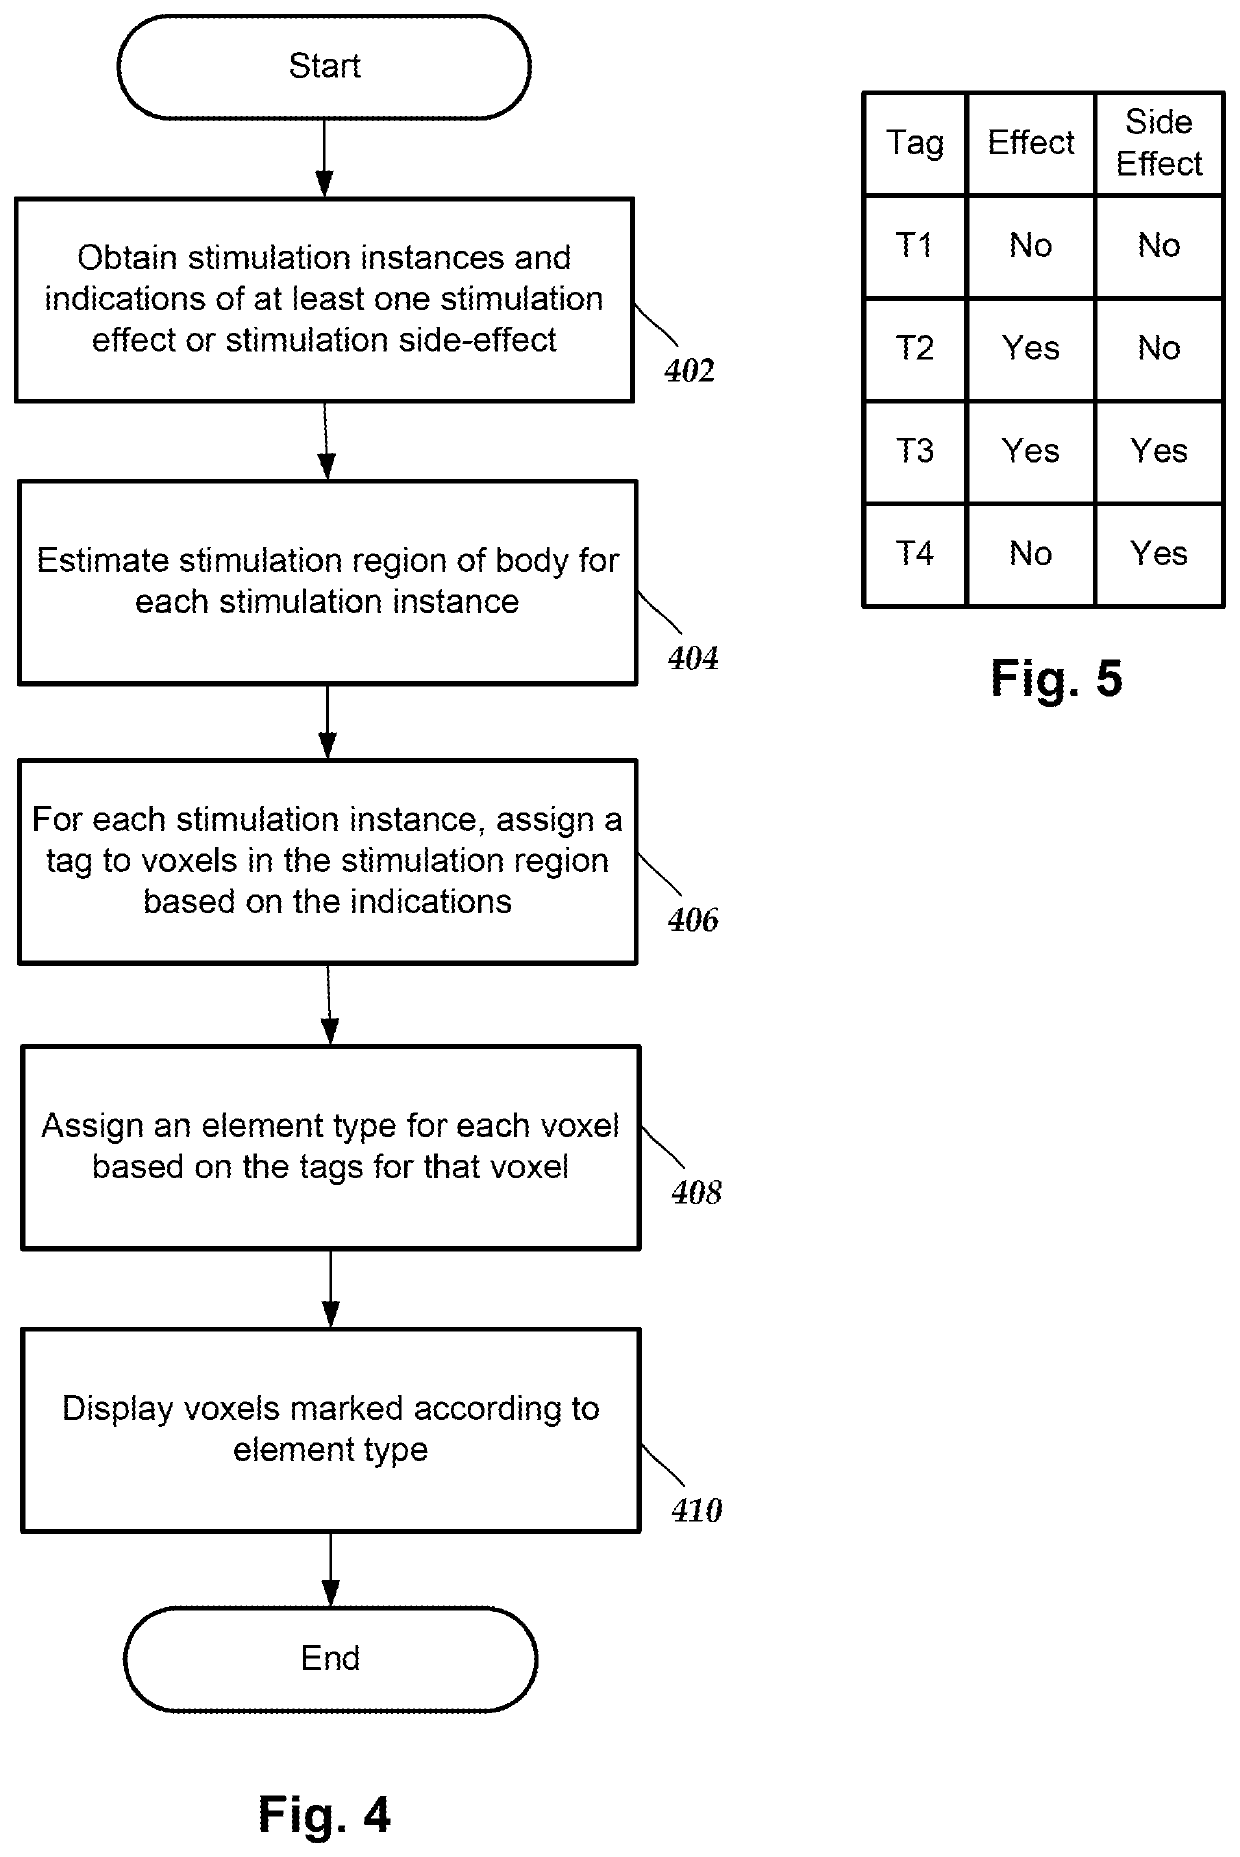 Systems and methods for visual analytics of clinical effects